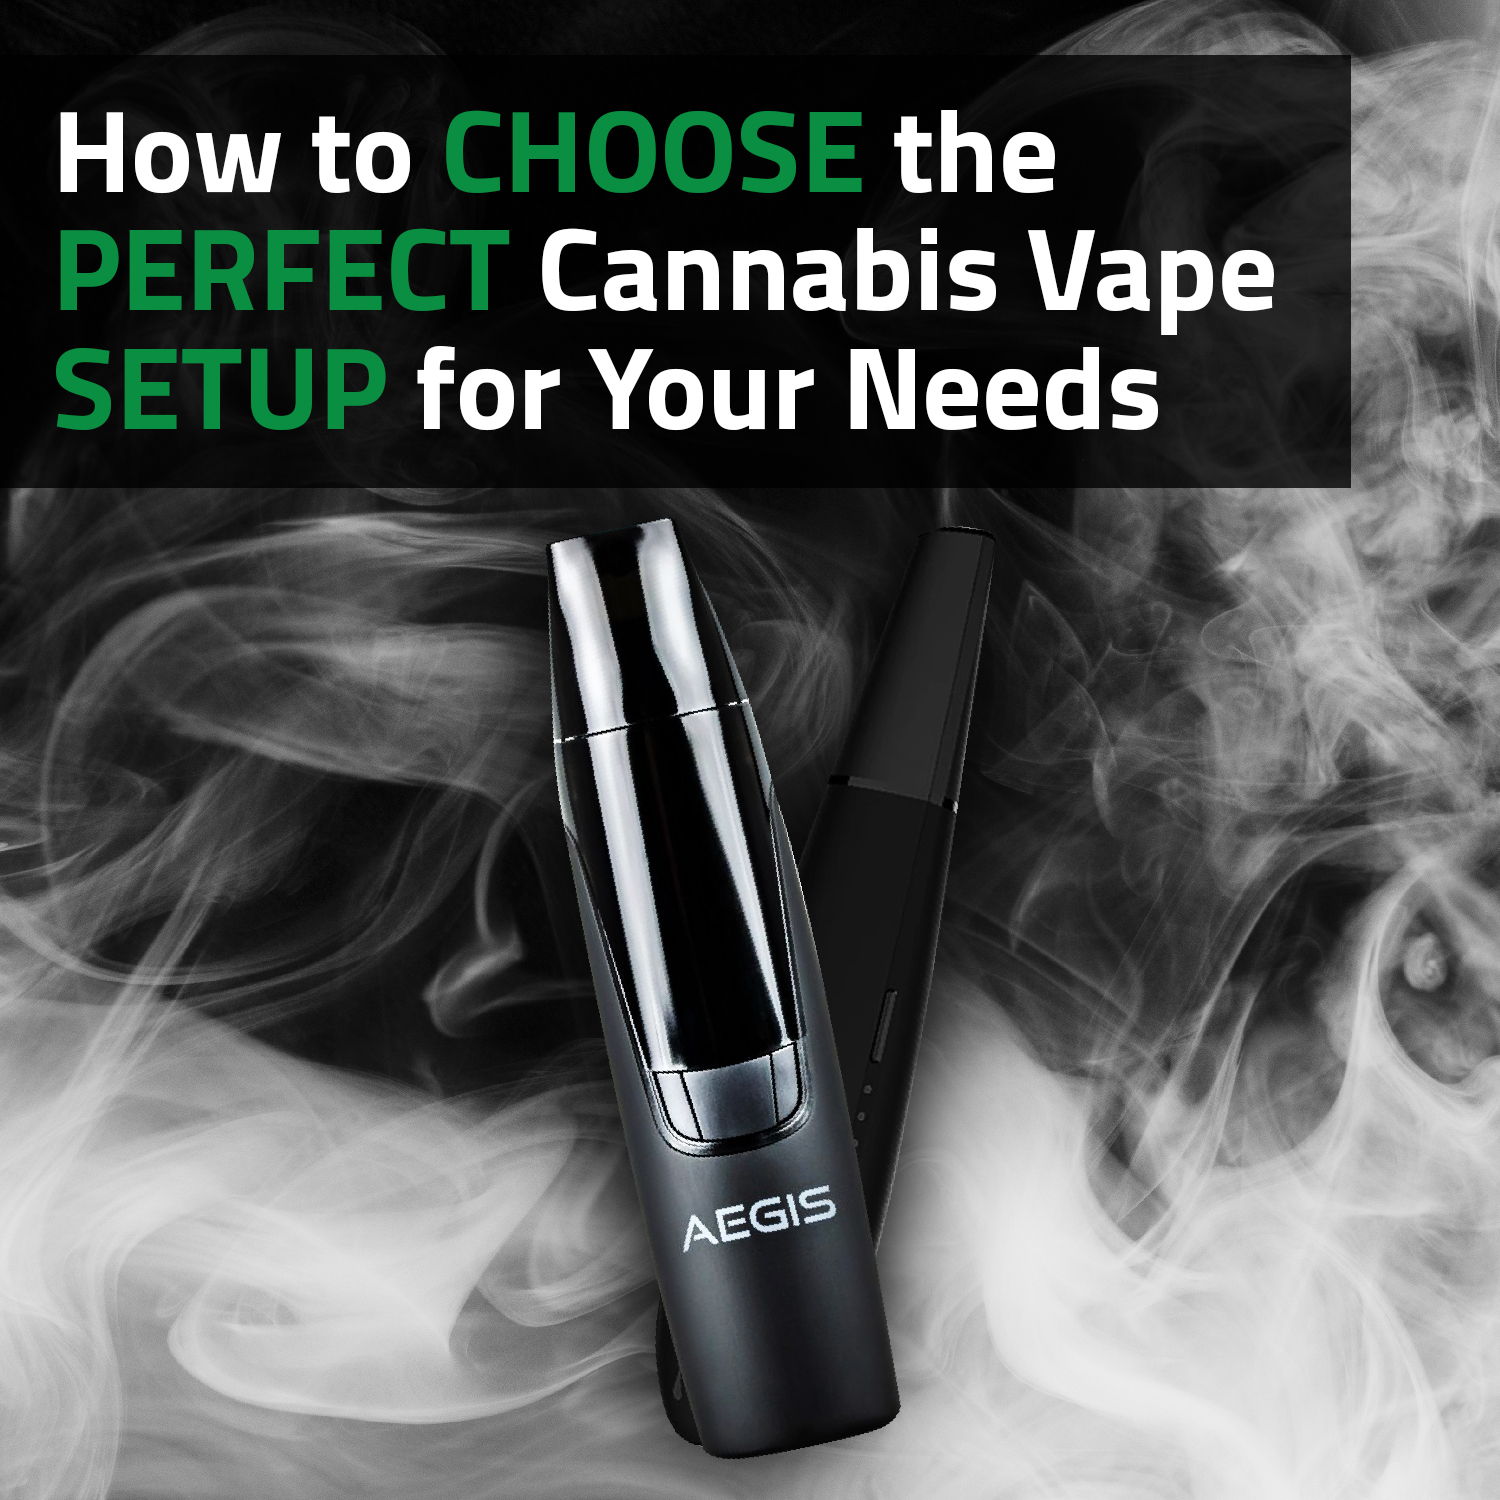 How To Choose The Perfect Cannabis Vape Setup For Your Needs